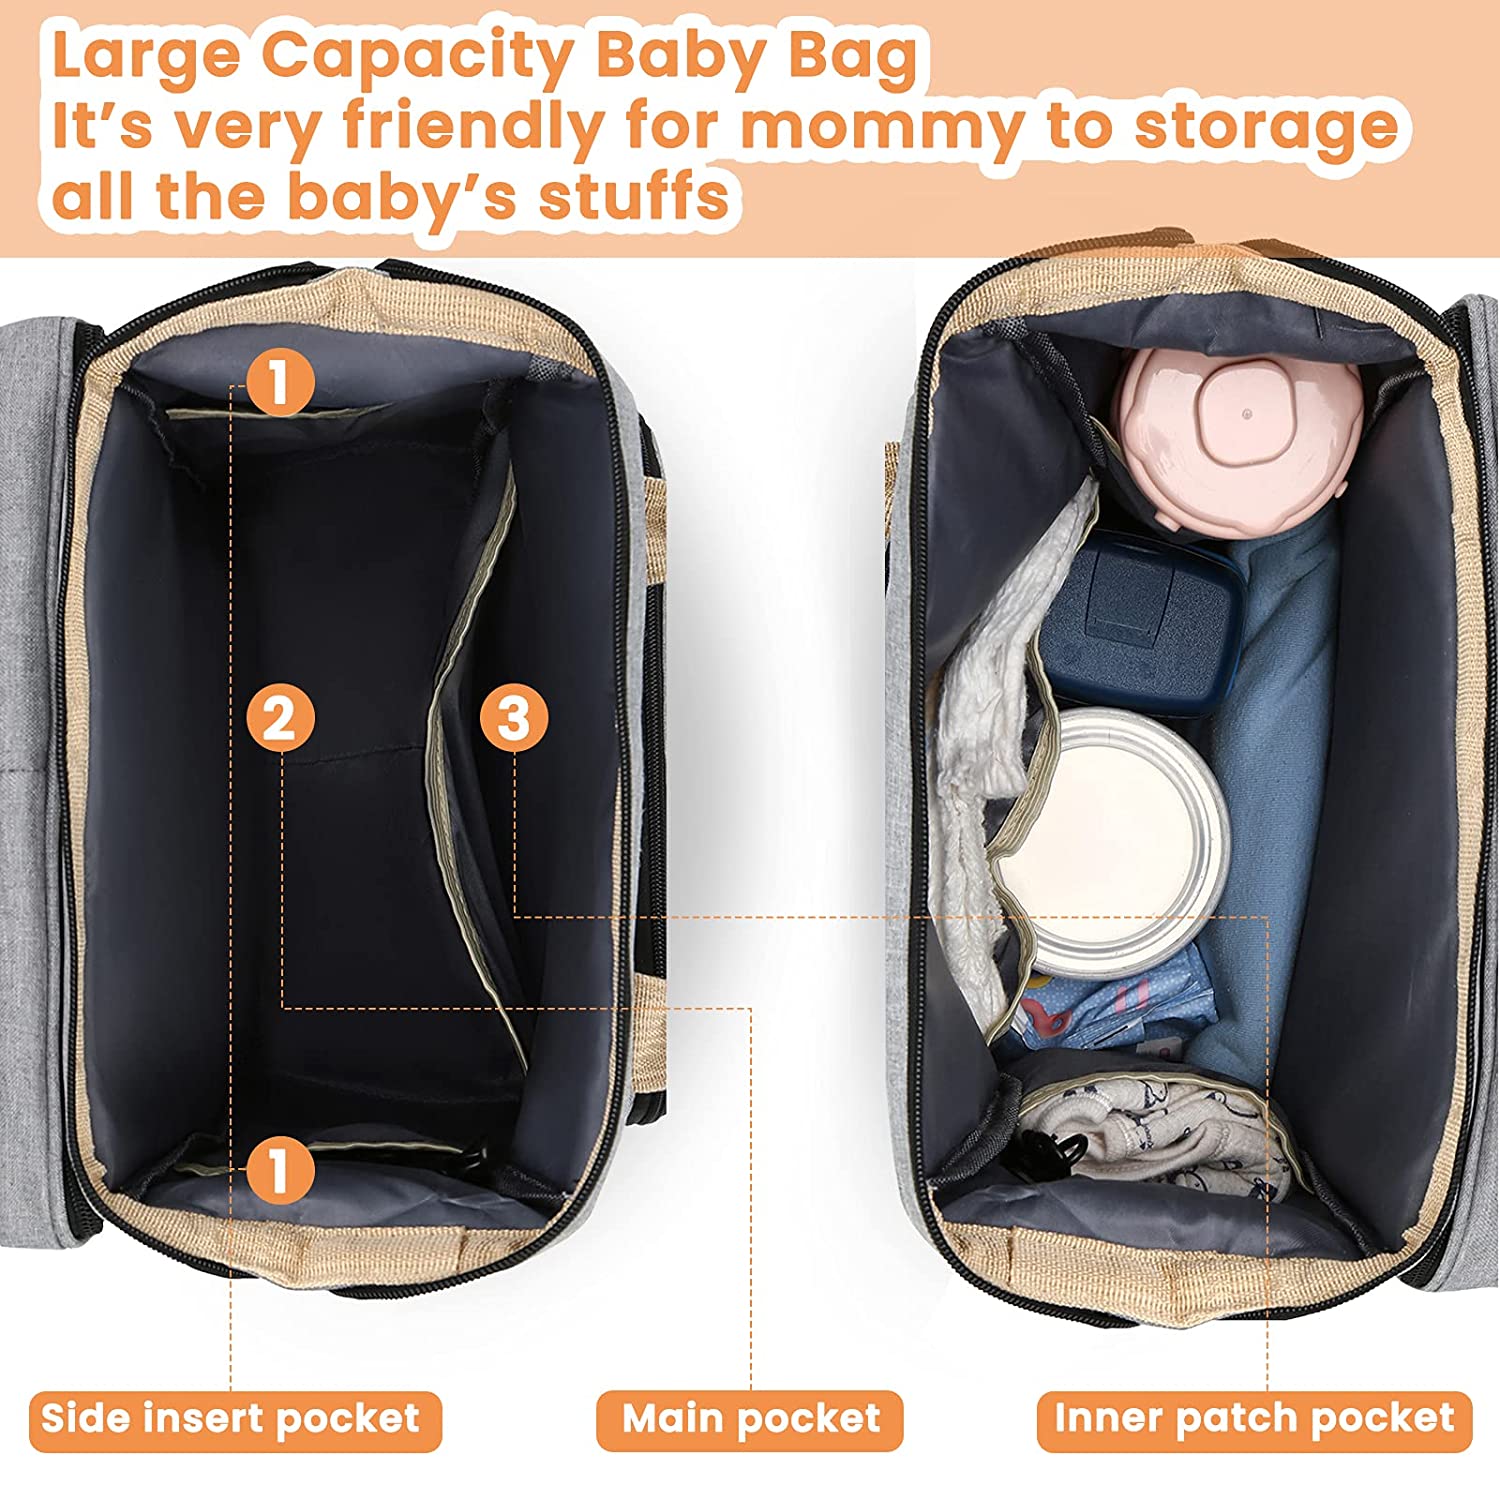 Buy Portable Baby Bed Online at PapaLiving